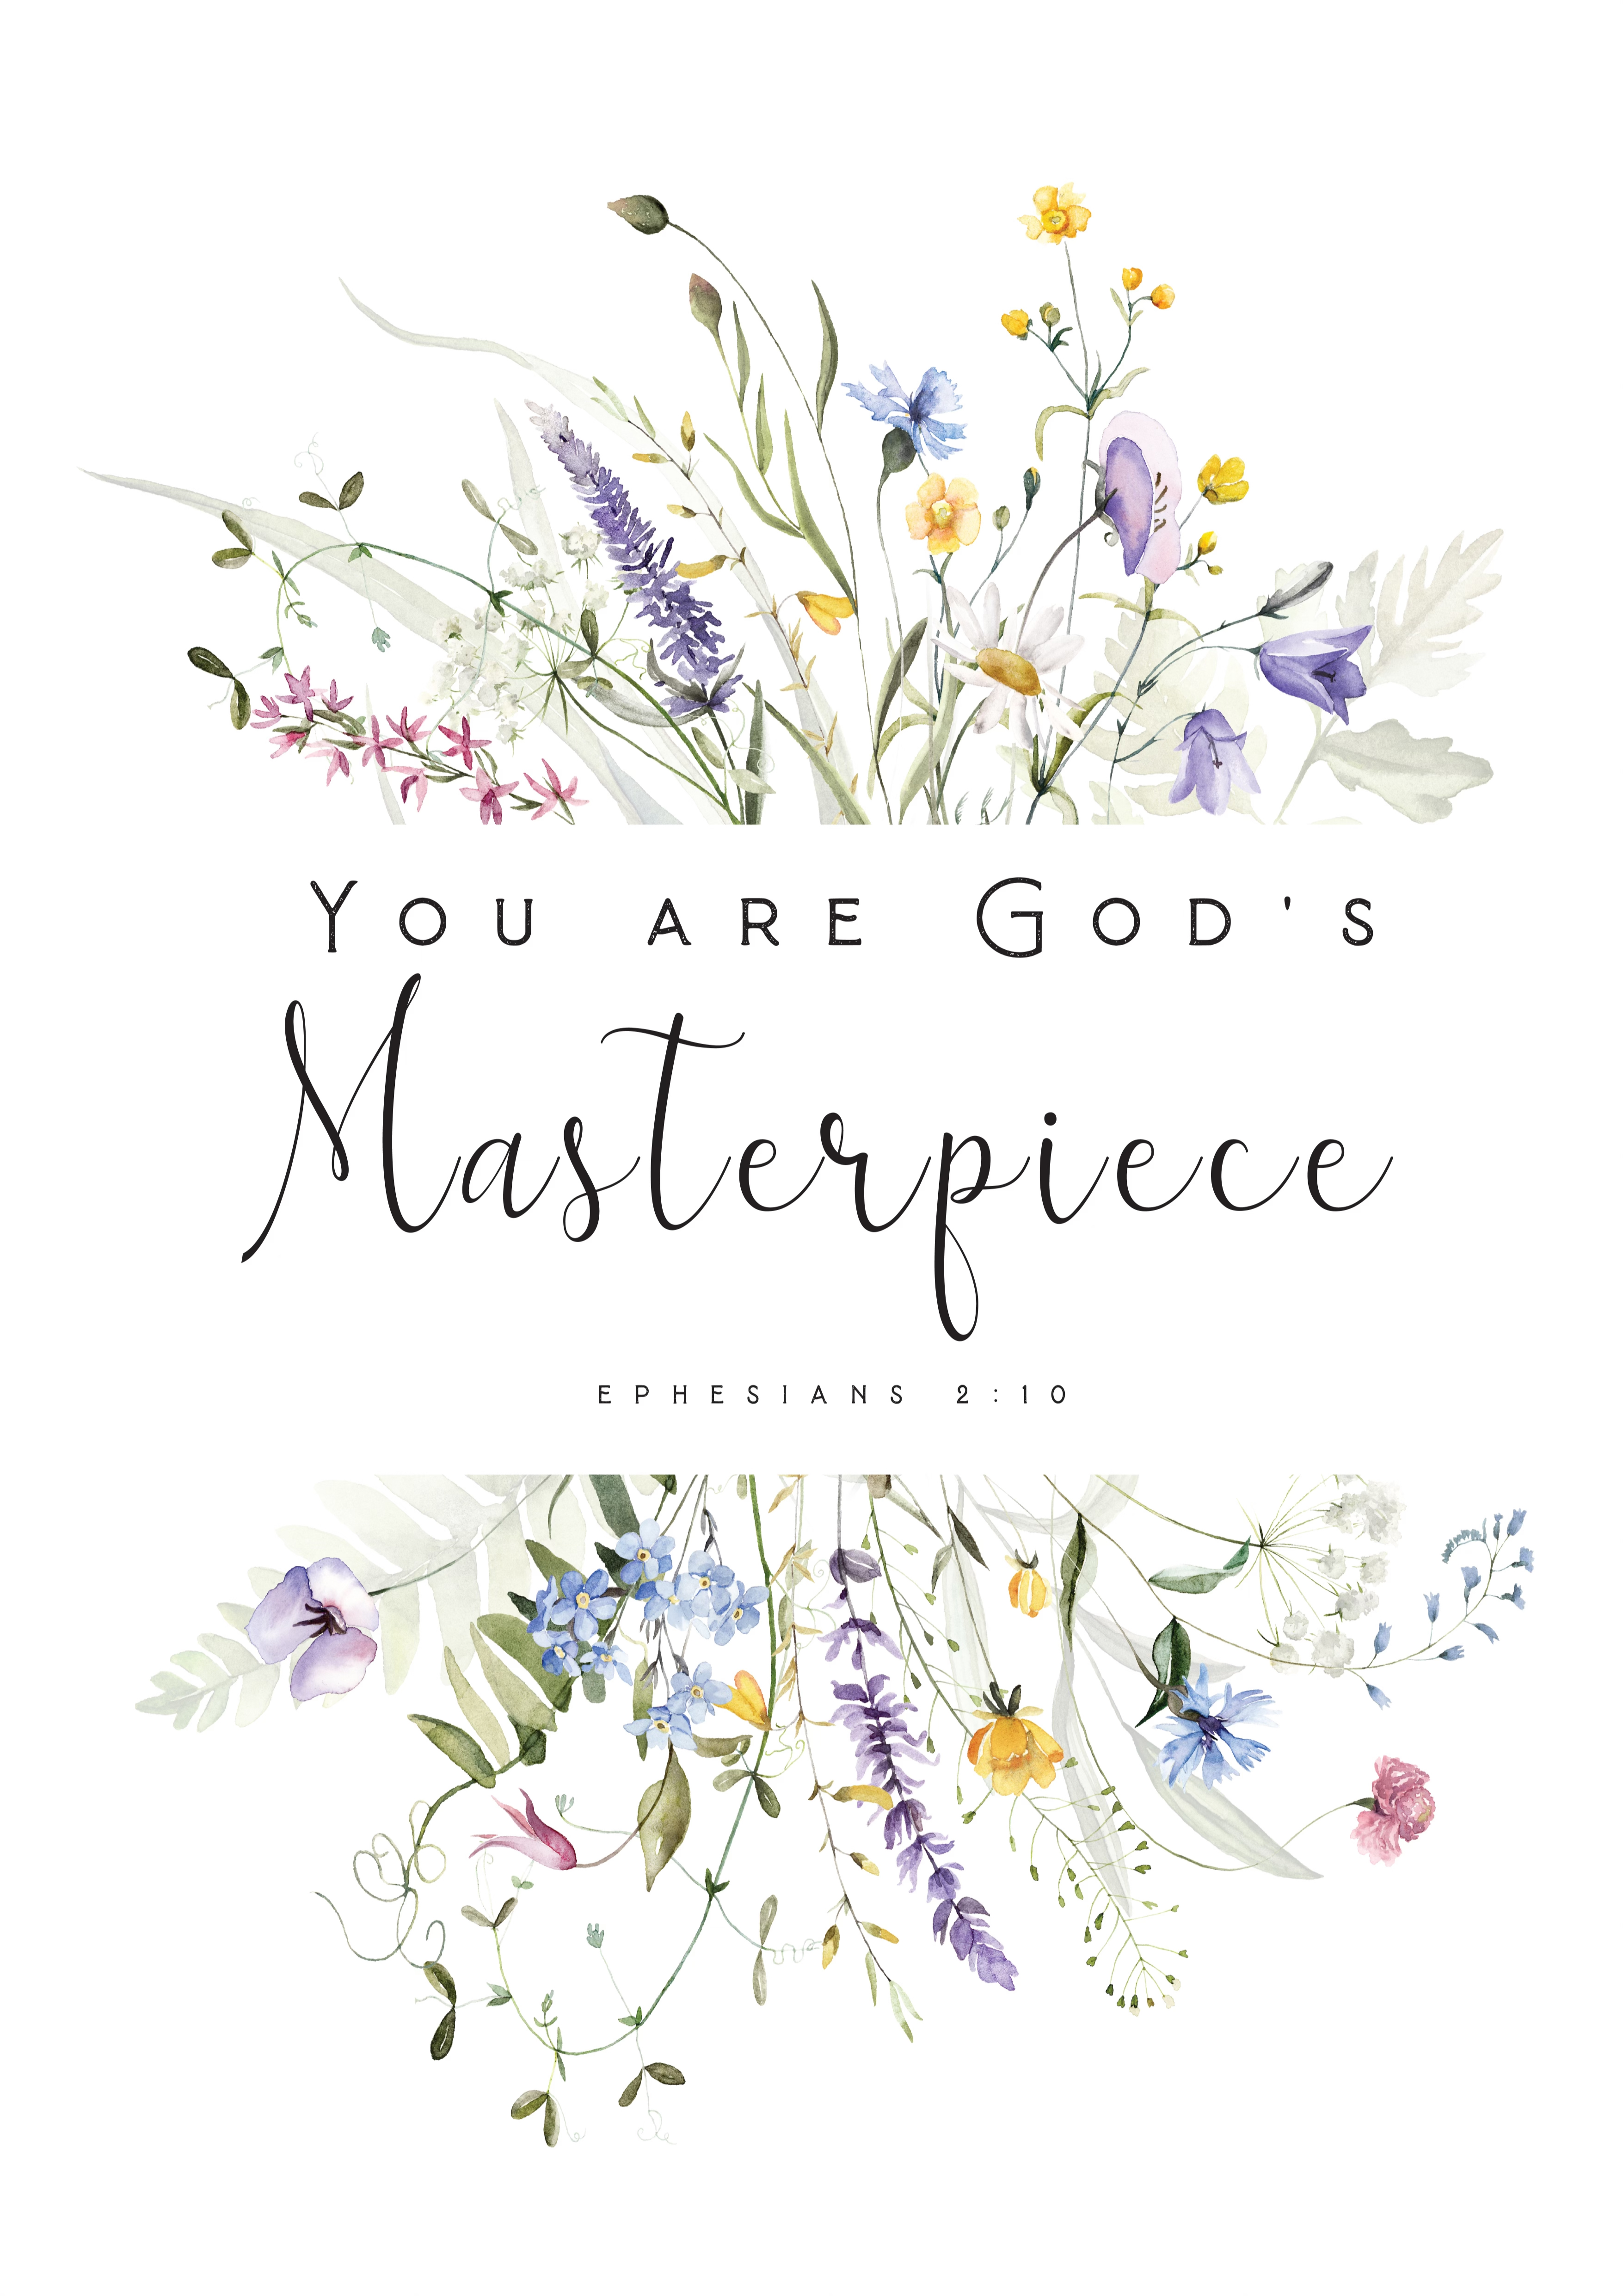 fancy text saying "you are God's masterpiece" overlaid on top of spring flowers